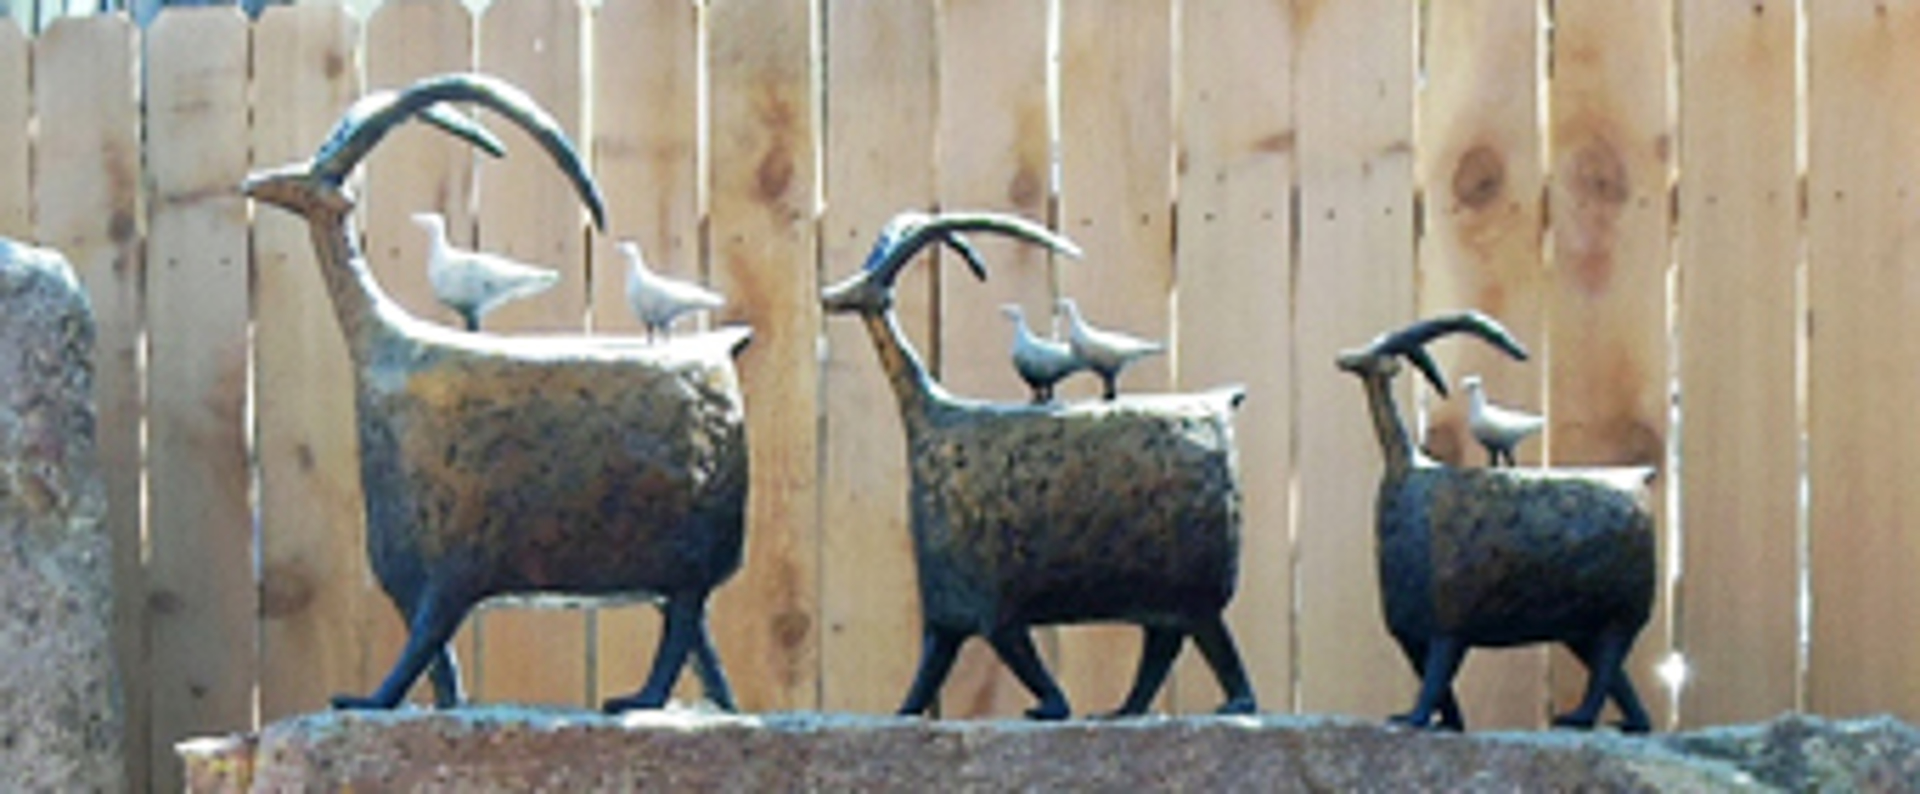 ON A MISSION - Bronze Sculptures LARGE $7850 (24"x20"x13") - MEDIUM $6400 (20"x17"x9") - SMALL $4200 (16"x13"x7") Rock pedestals LARGE $1650 (60"x12") SMALL $775 (42"x21") May be purchased separately or together. by Jill Shwaiko